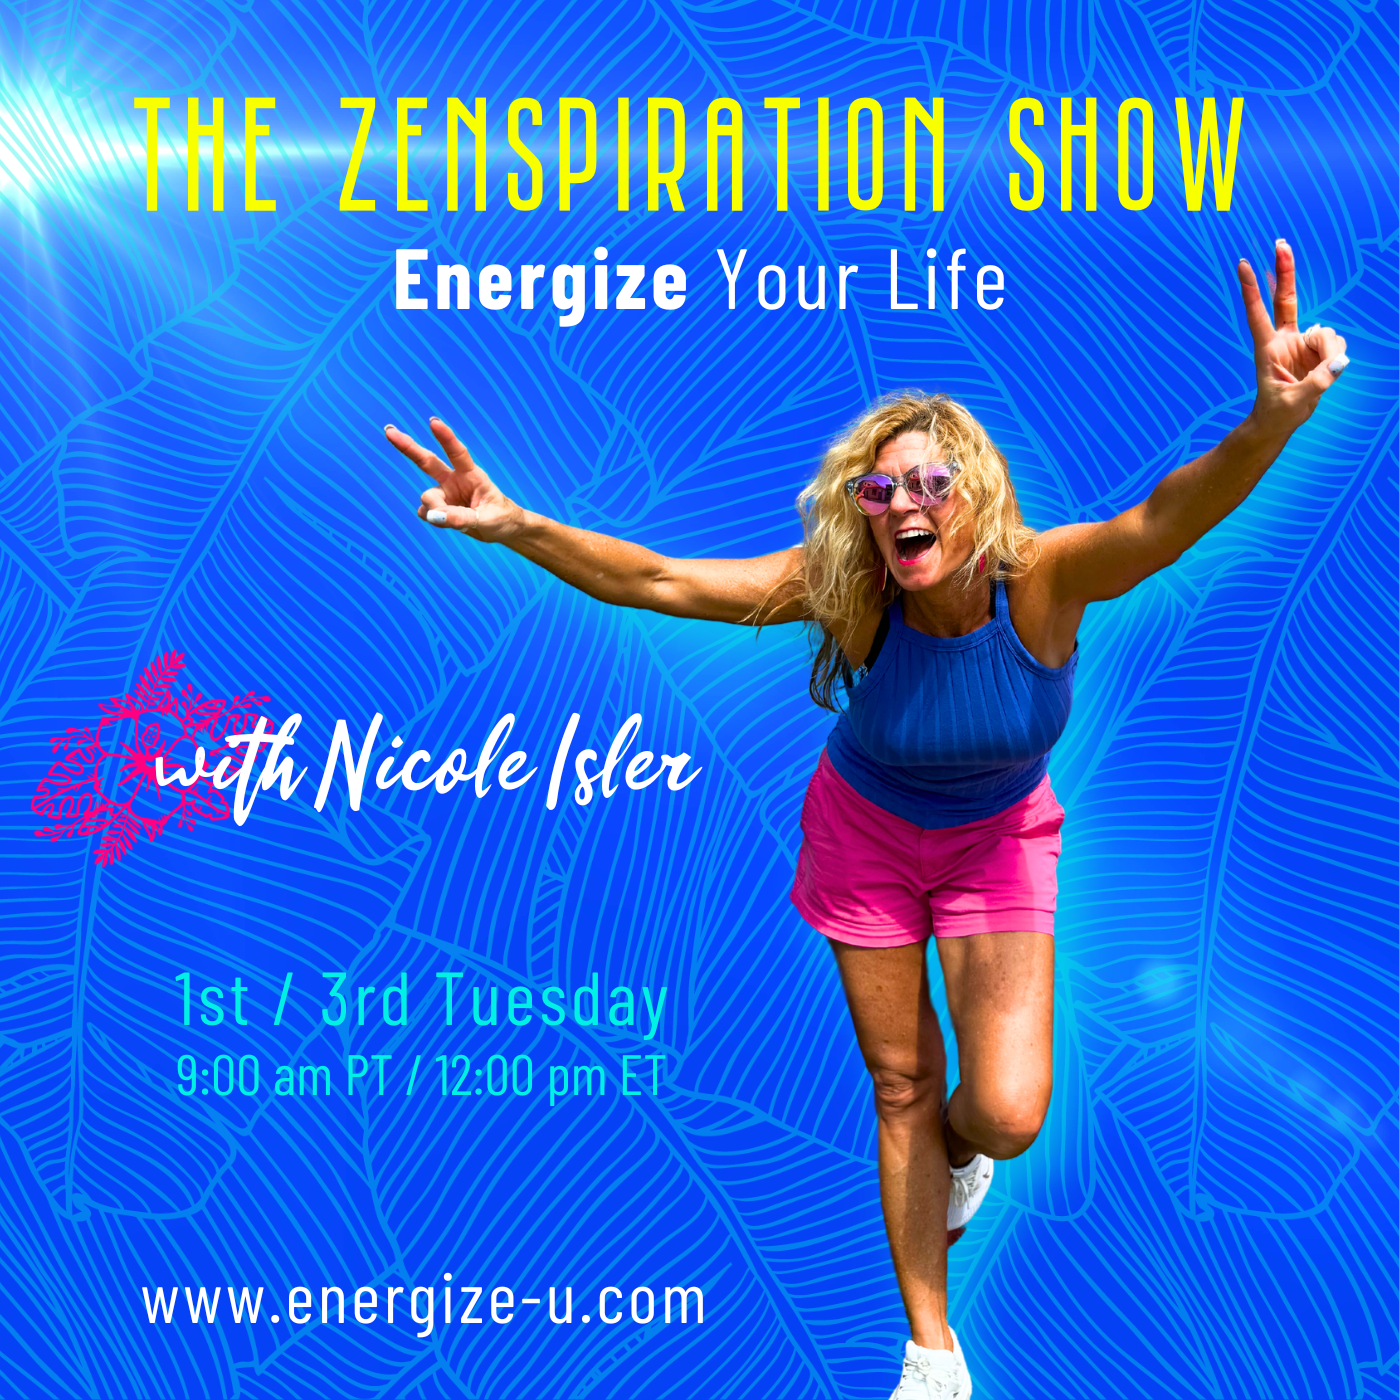 The Zenspiration Show with Nicole Isler: Energize Your Life